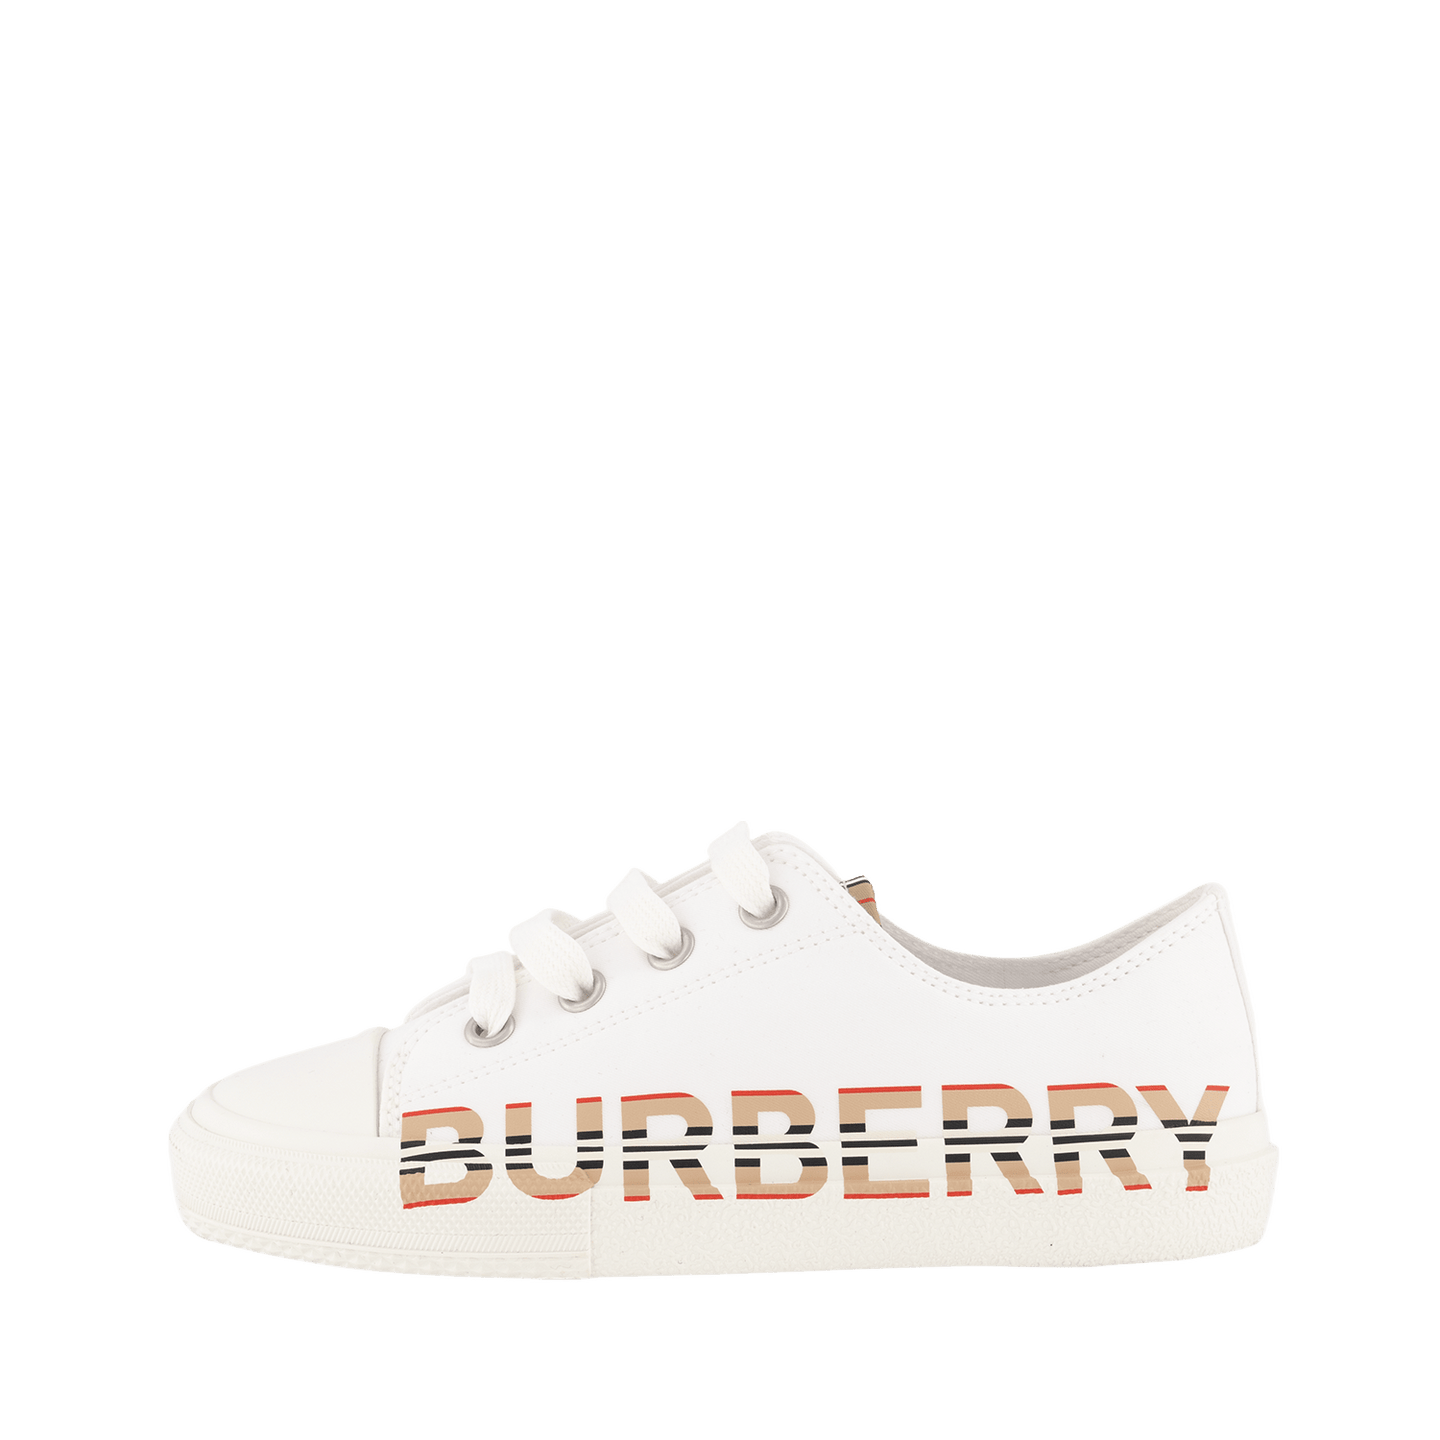 Burberry Kinder Unisex Sneakers Wit 28